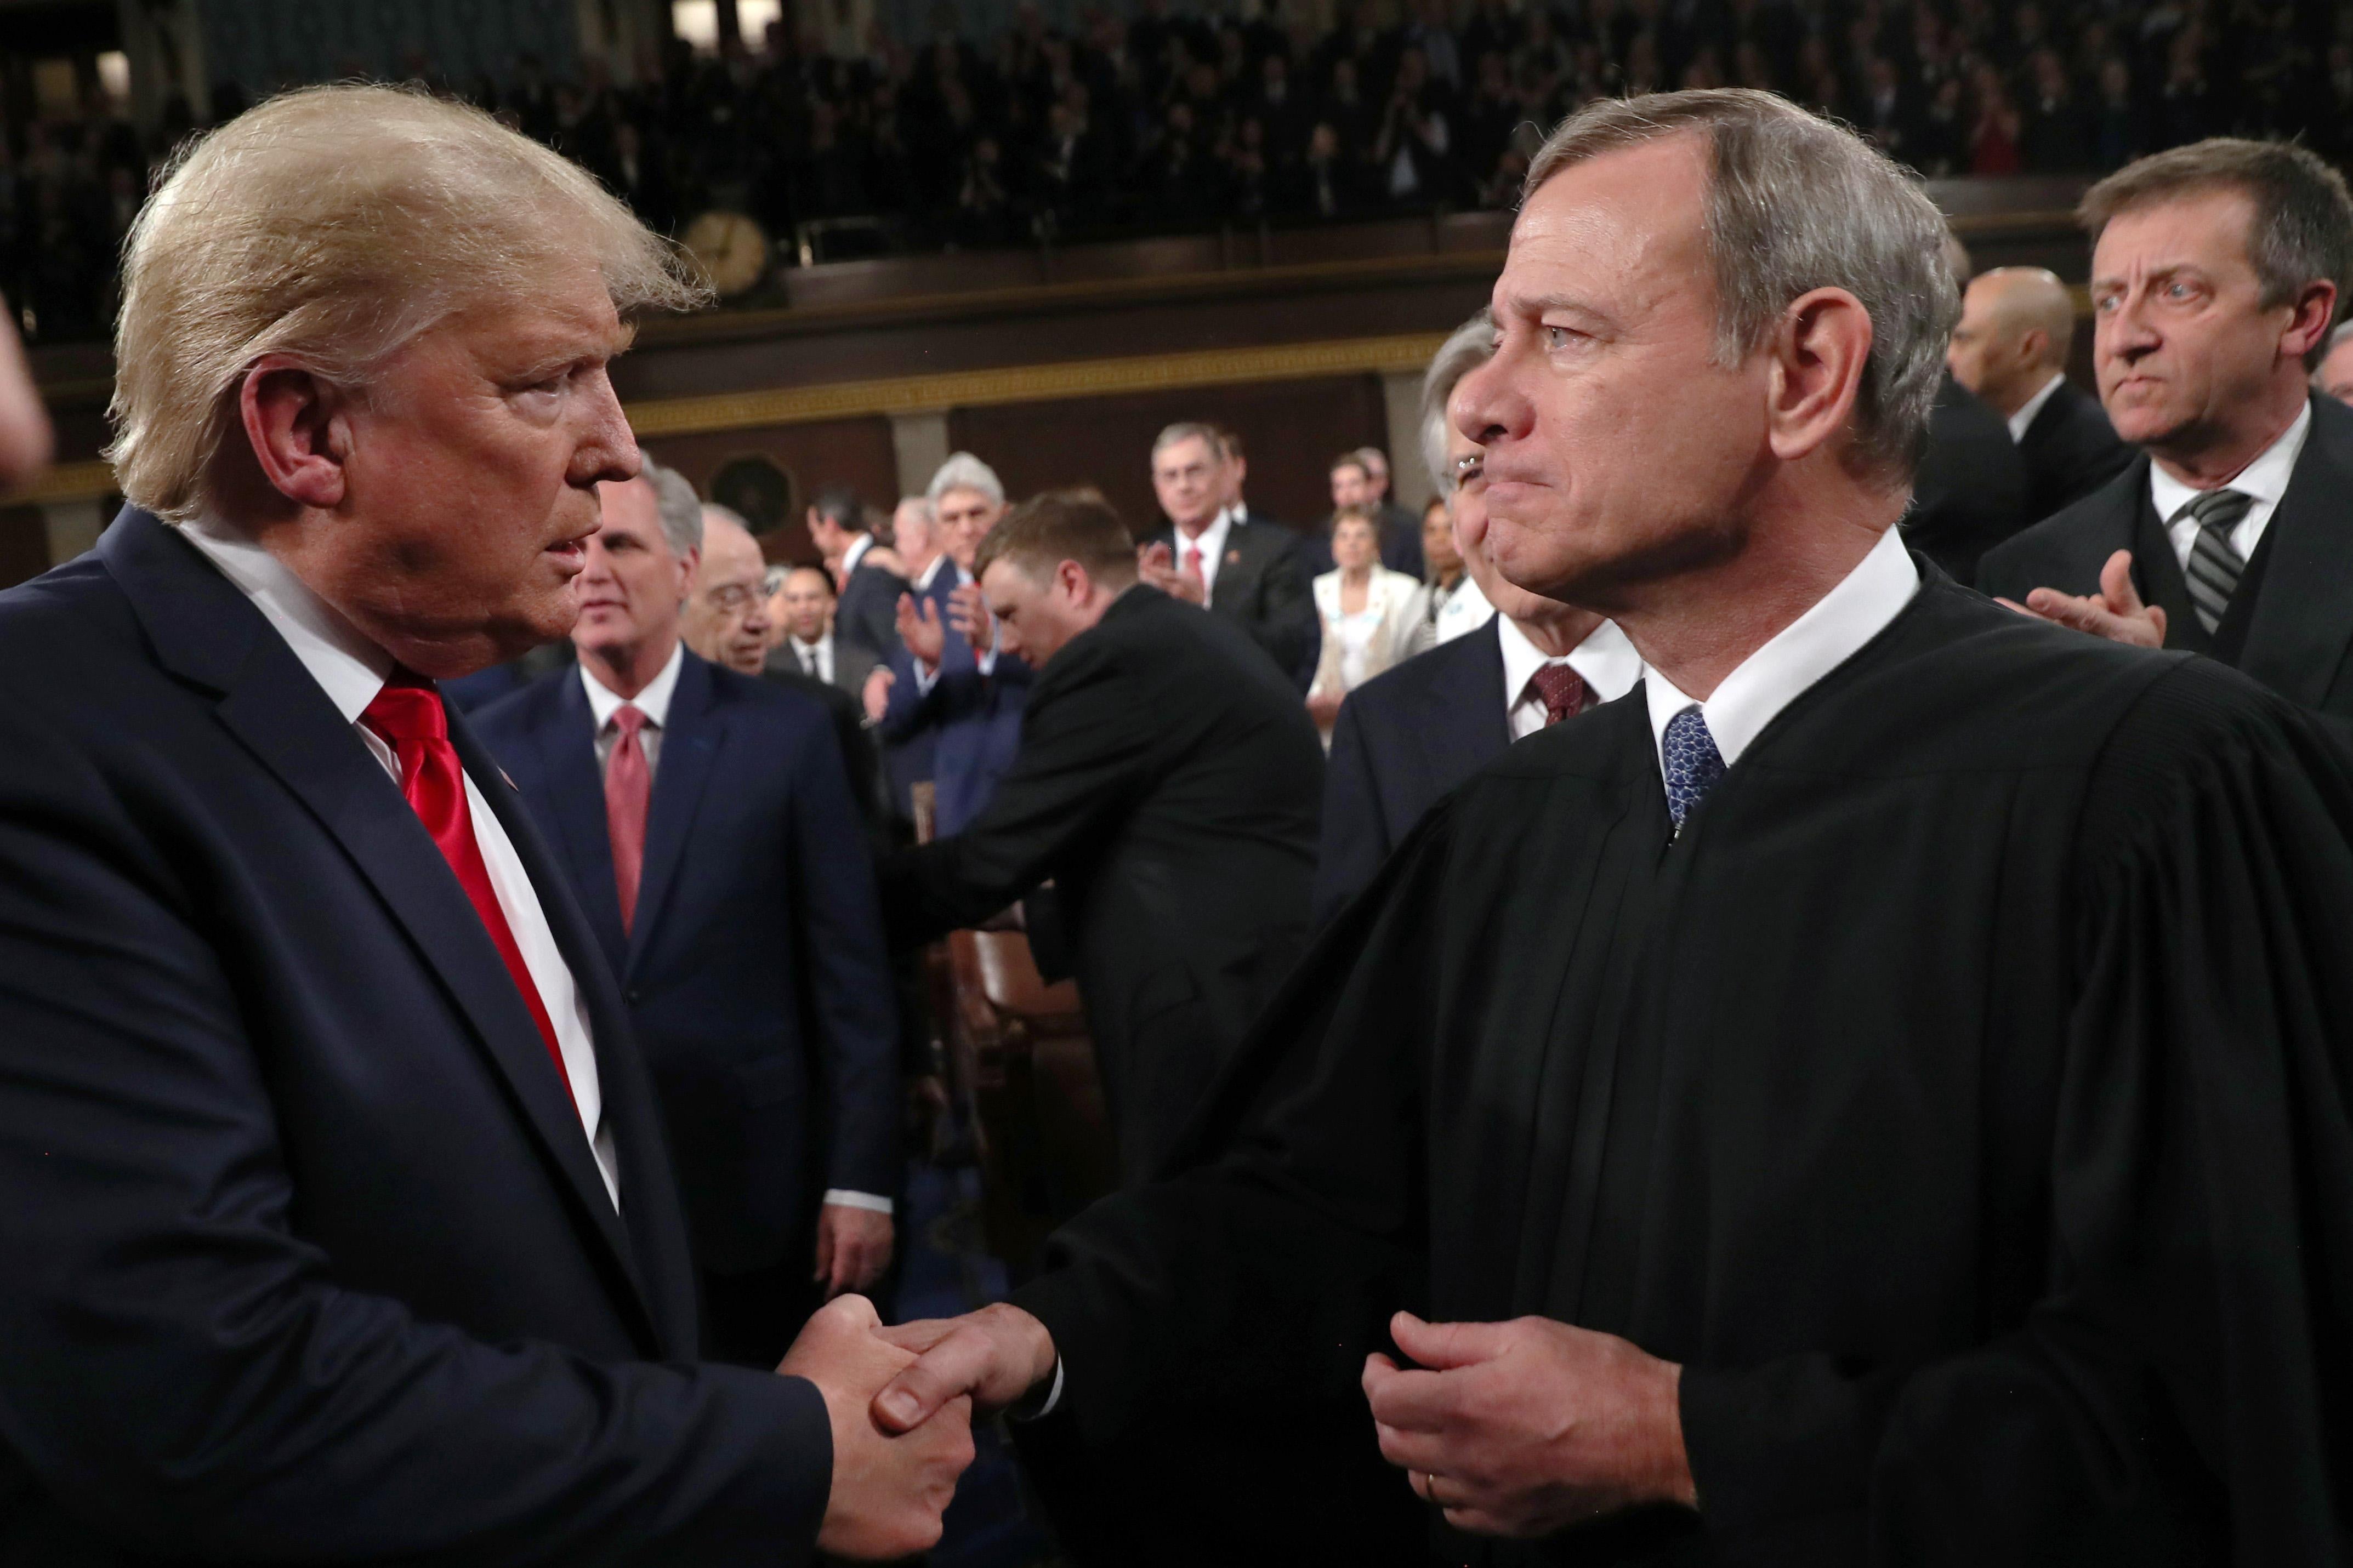 Donald Trump shakes hands with John Roberts before the State of the Union address.